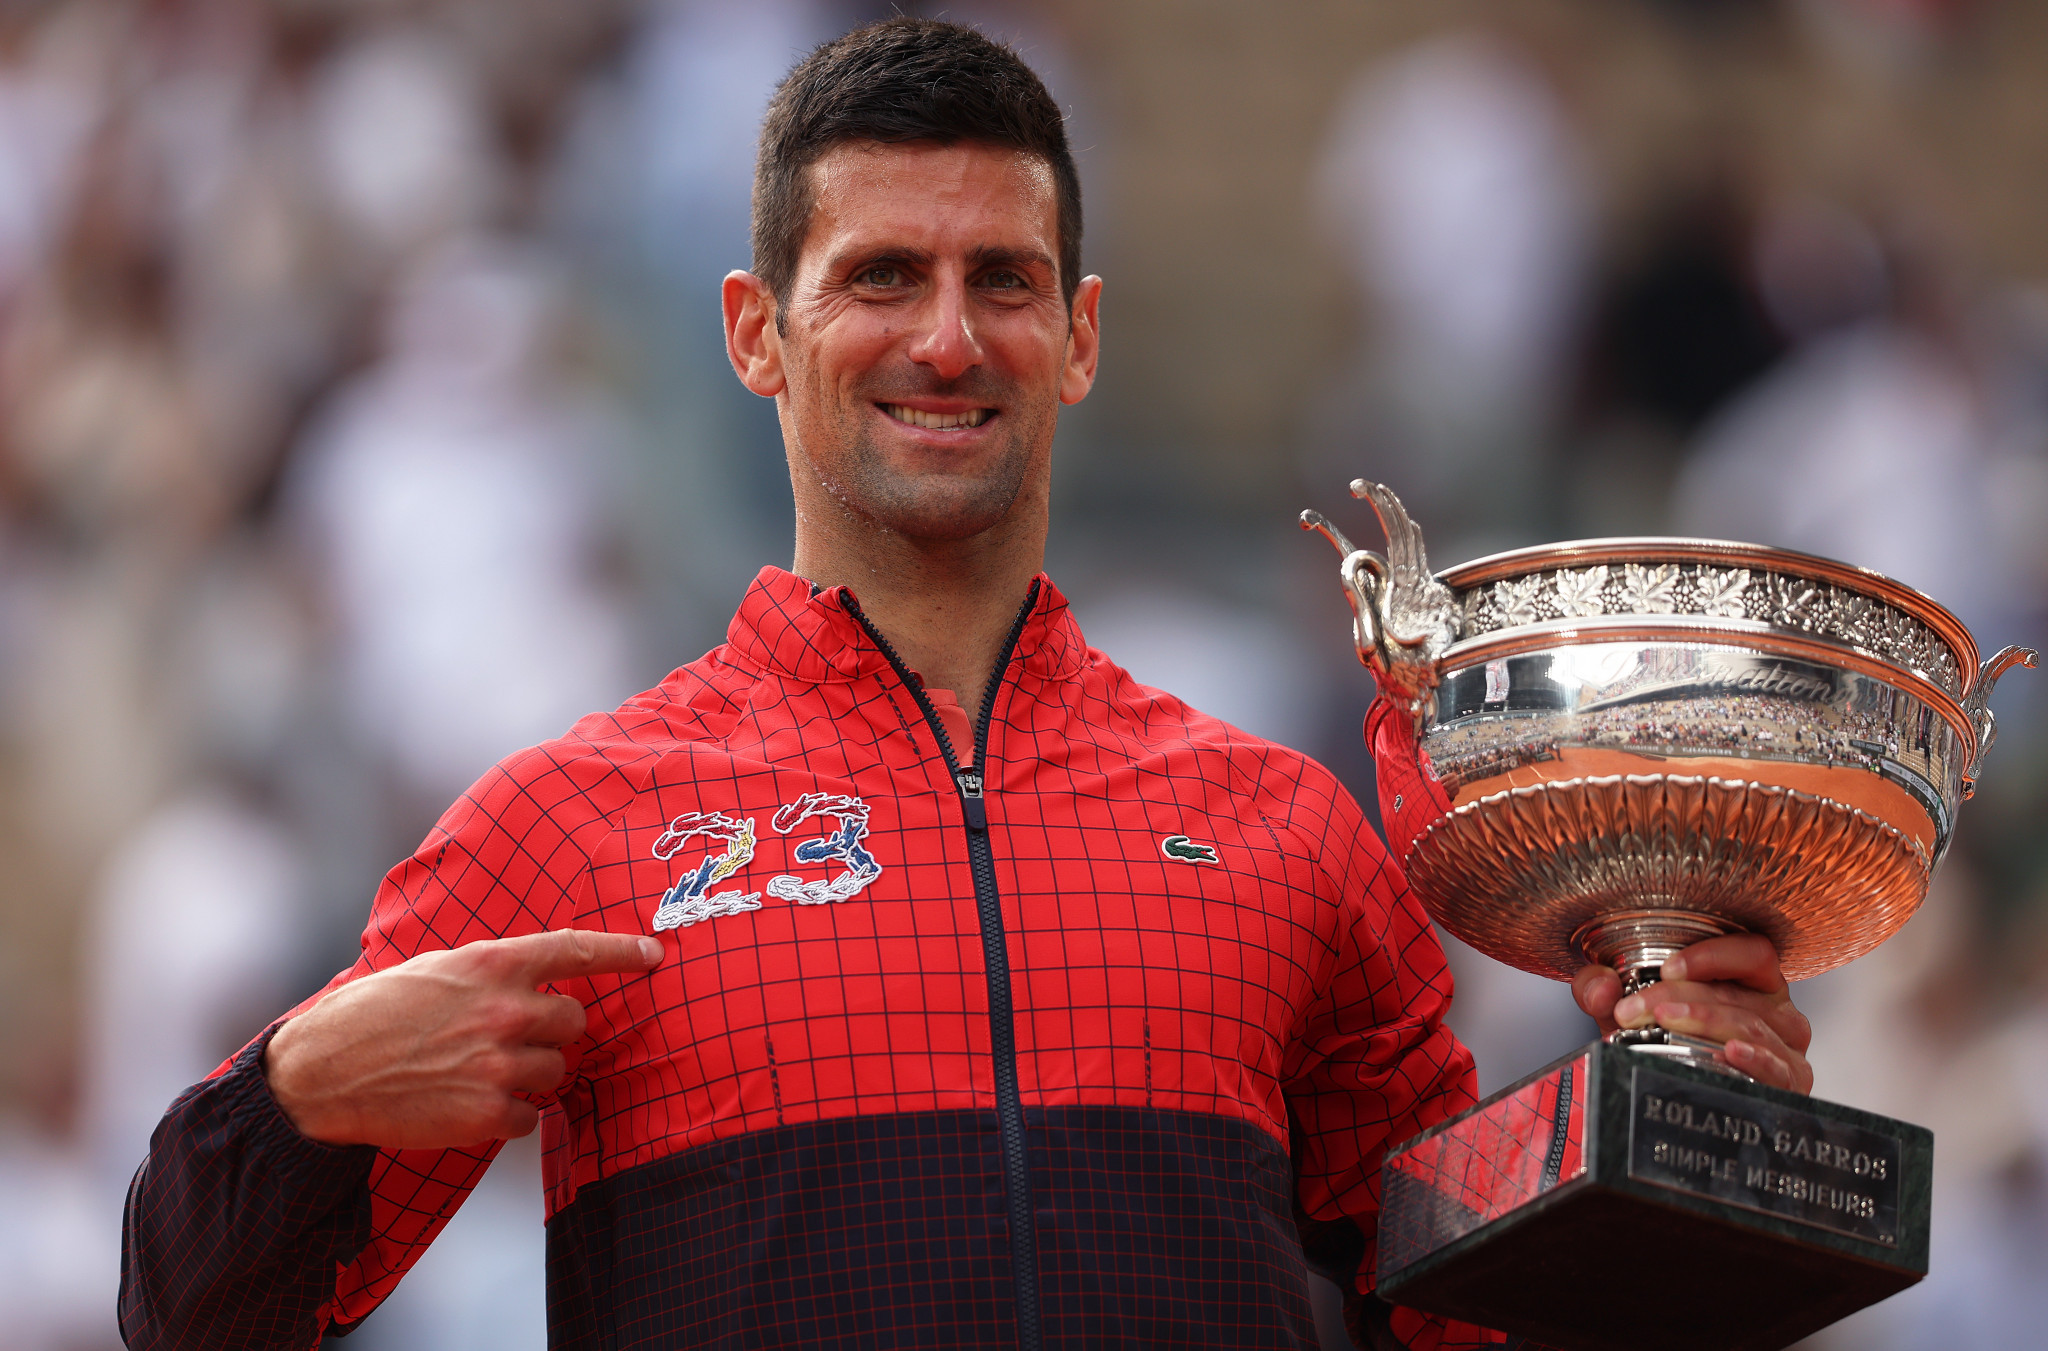 Djokovic earns congratulations aplenty after record 23rd Grand Slam title at French Open